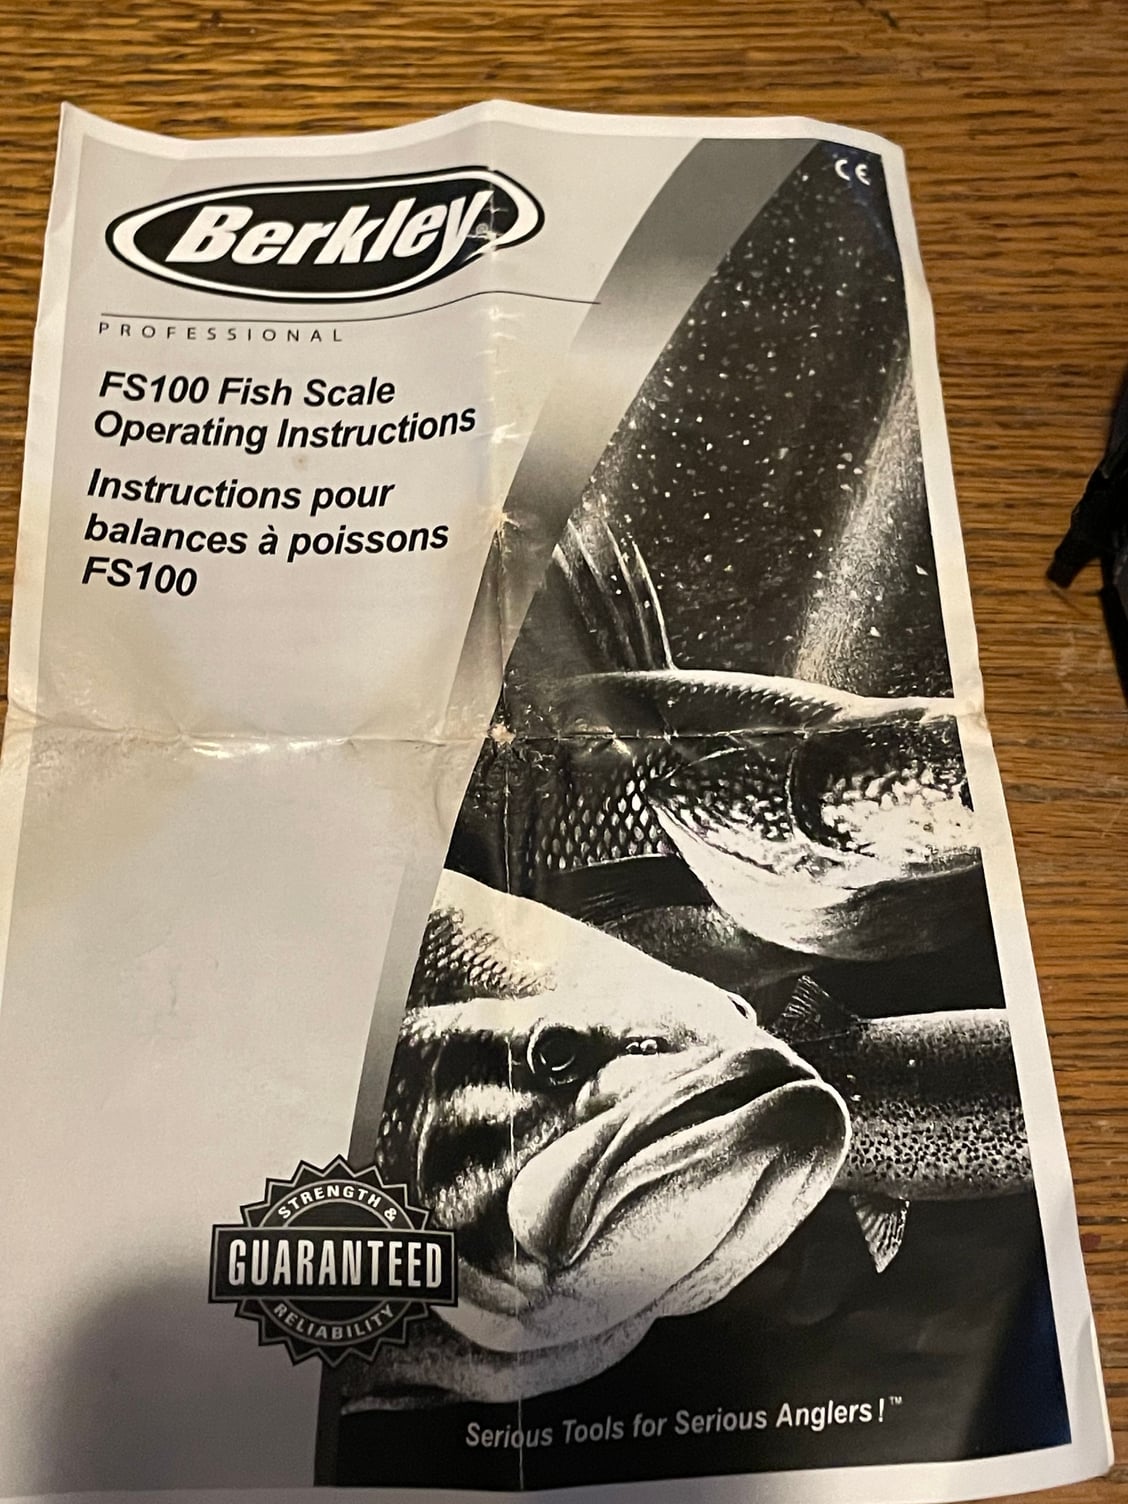 Berkley FS100 Fish Scale - 100lb - used - The Hull Truth - Boating and  Fishing Forum